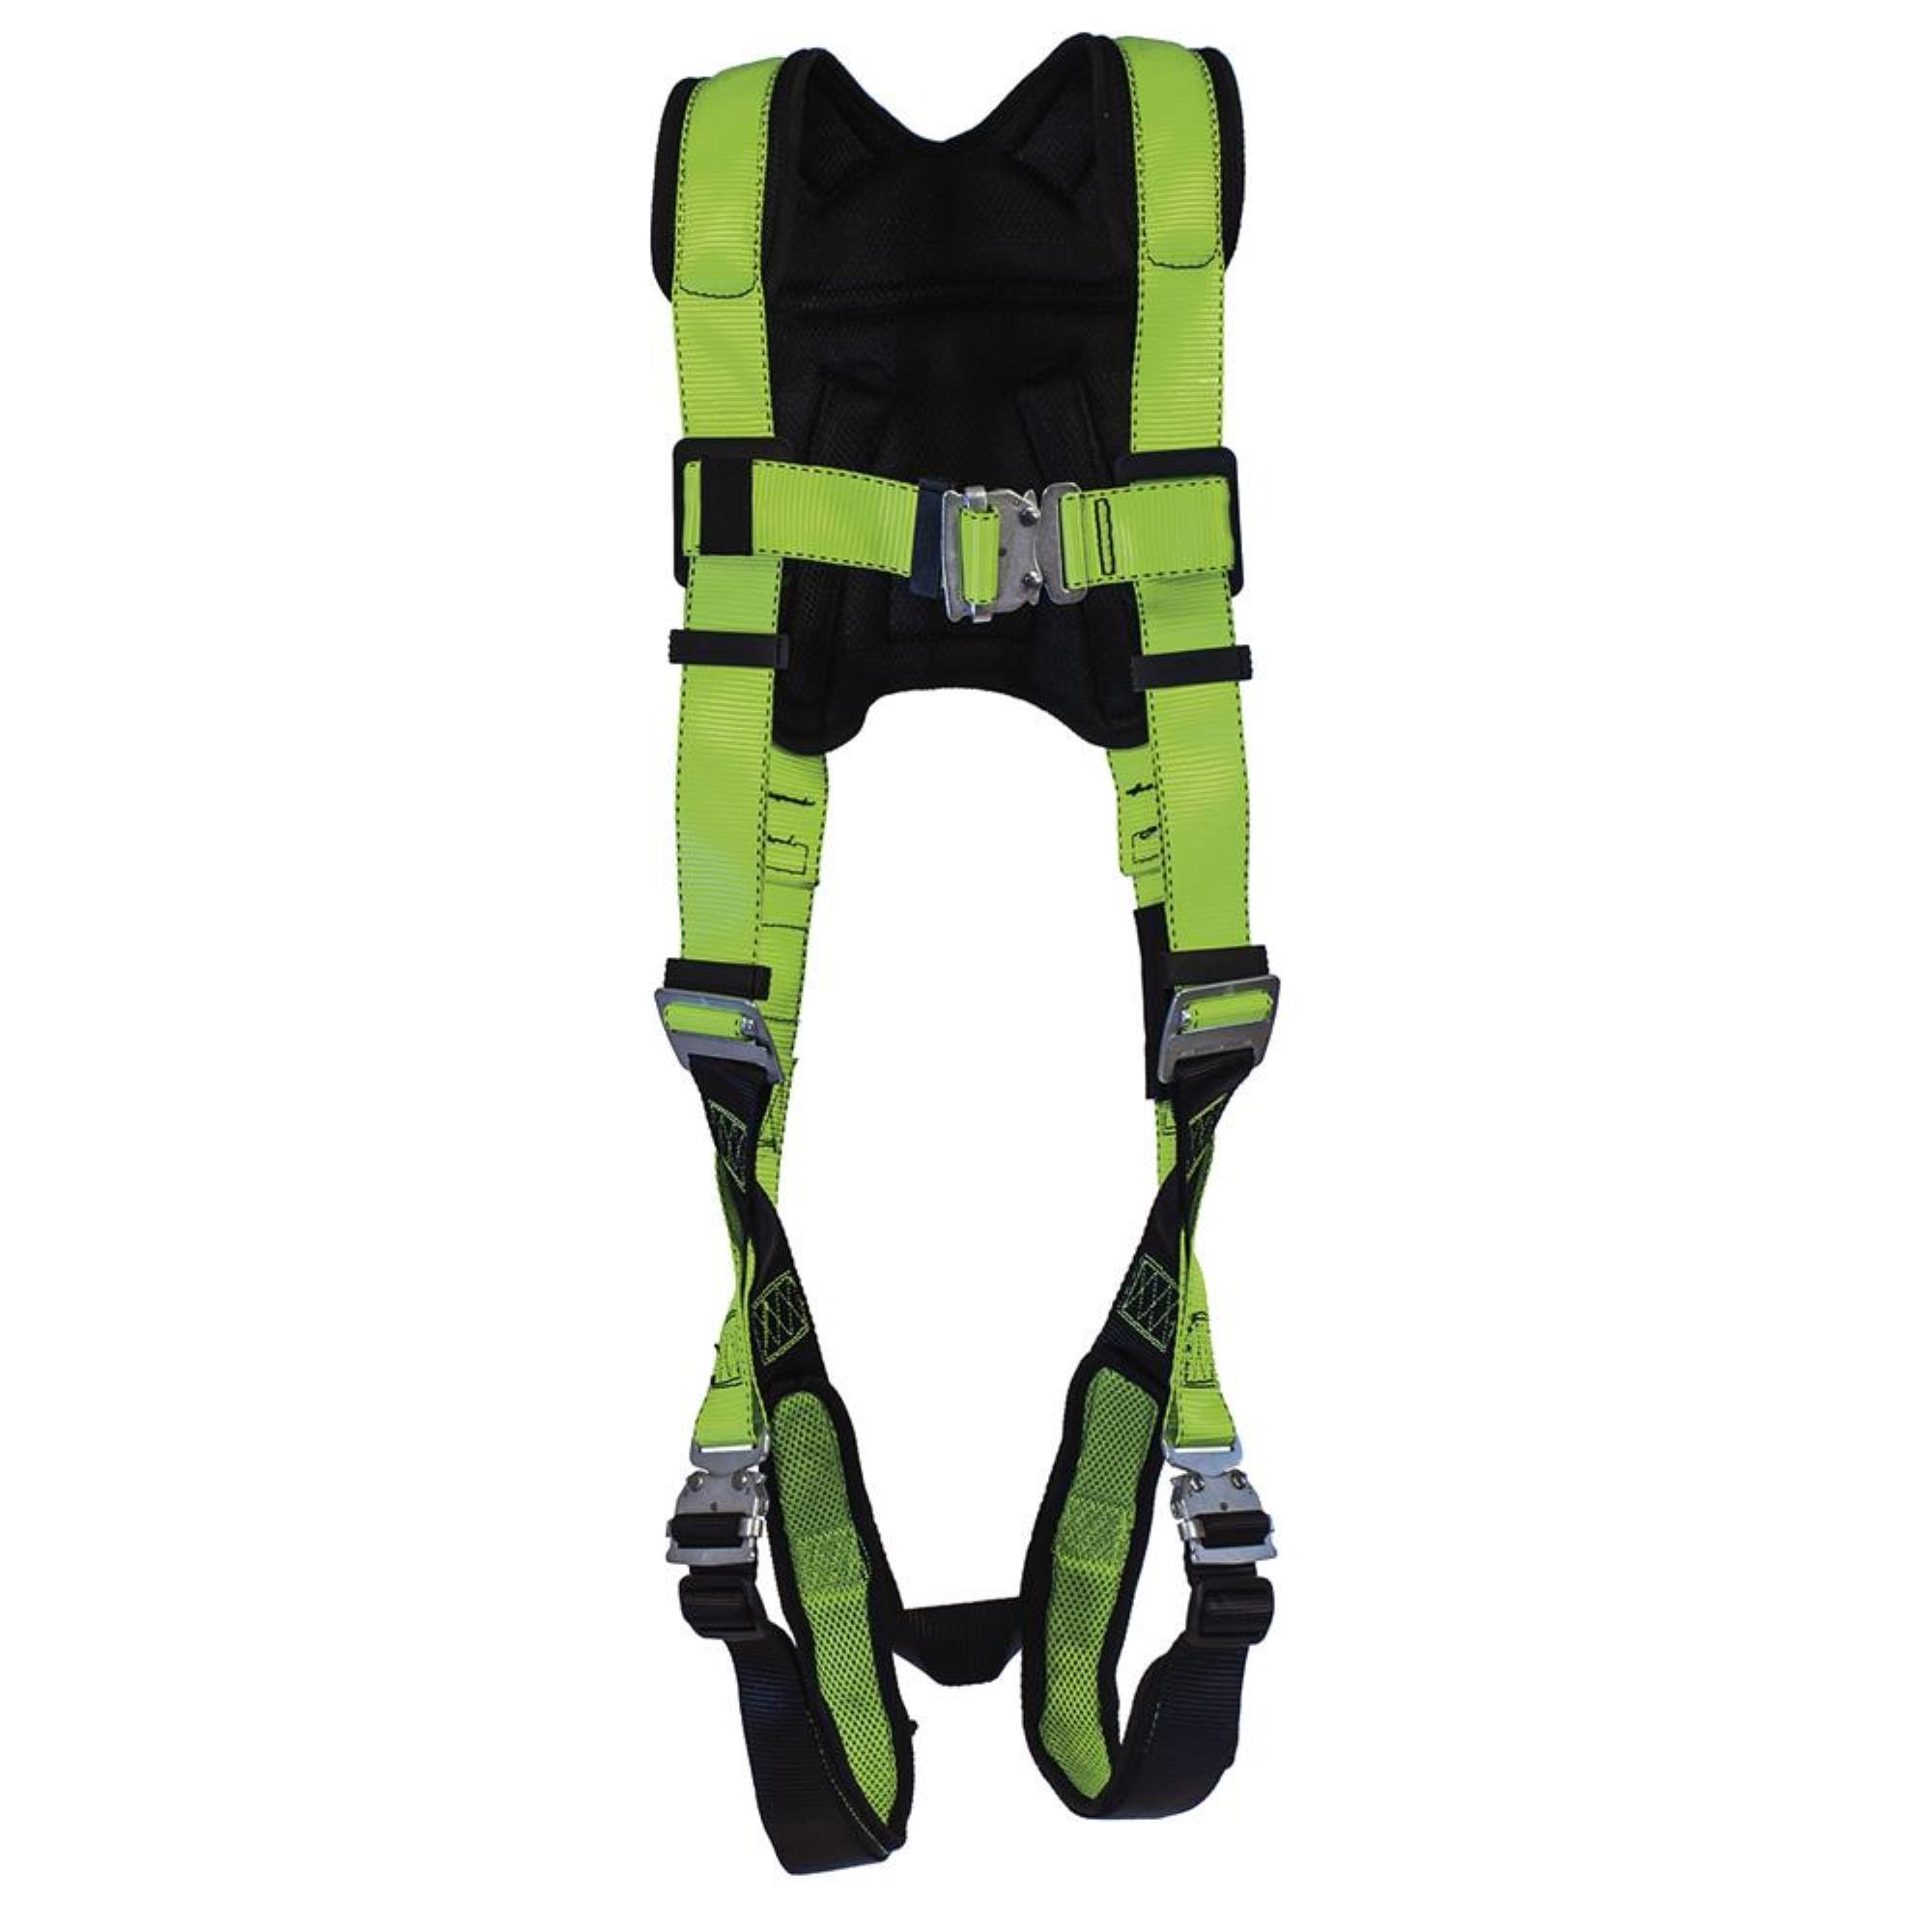 Peak Works, PeakPro Harness 1D 400 Lbs Class A Trauma Strap, Weight Capacity 400 lb, Harness Size One Size, Model V8006100